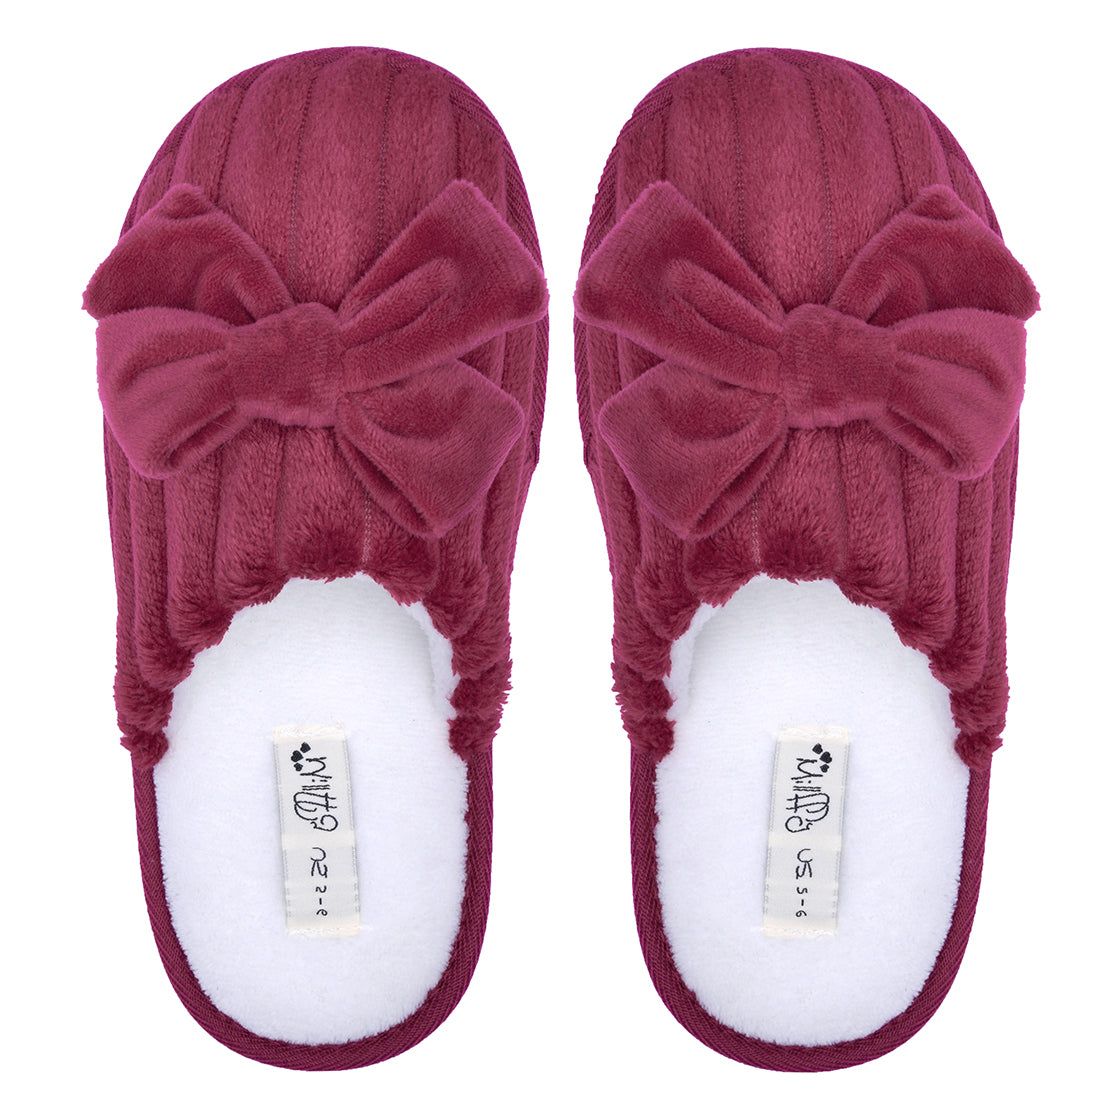 Millffy Womens Cute Comfy Fuzzy Knitted Memory Foam Slip On Big Wave Stripe House Slippers